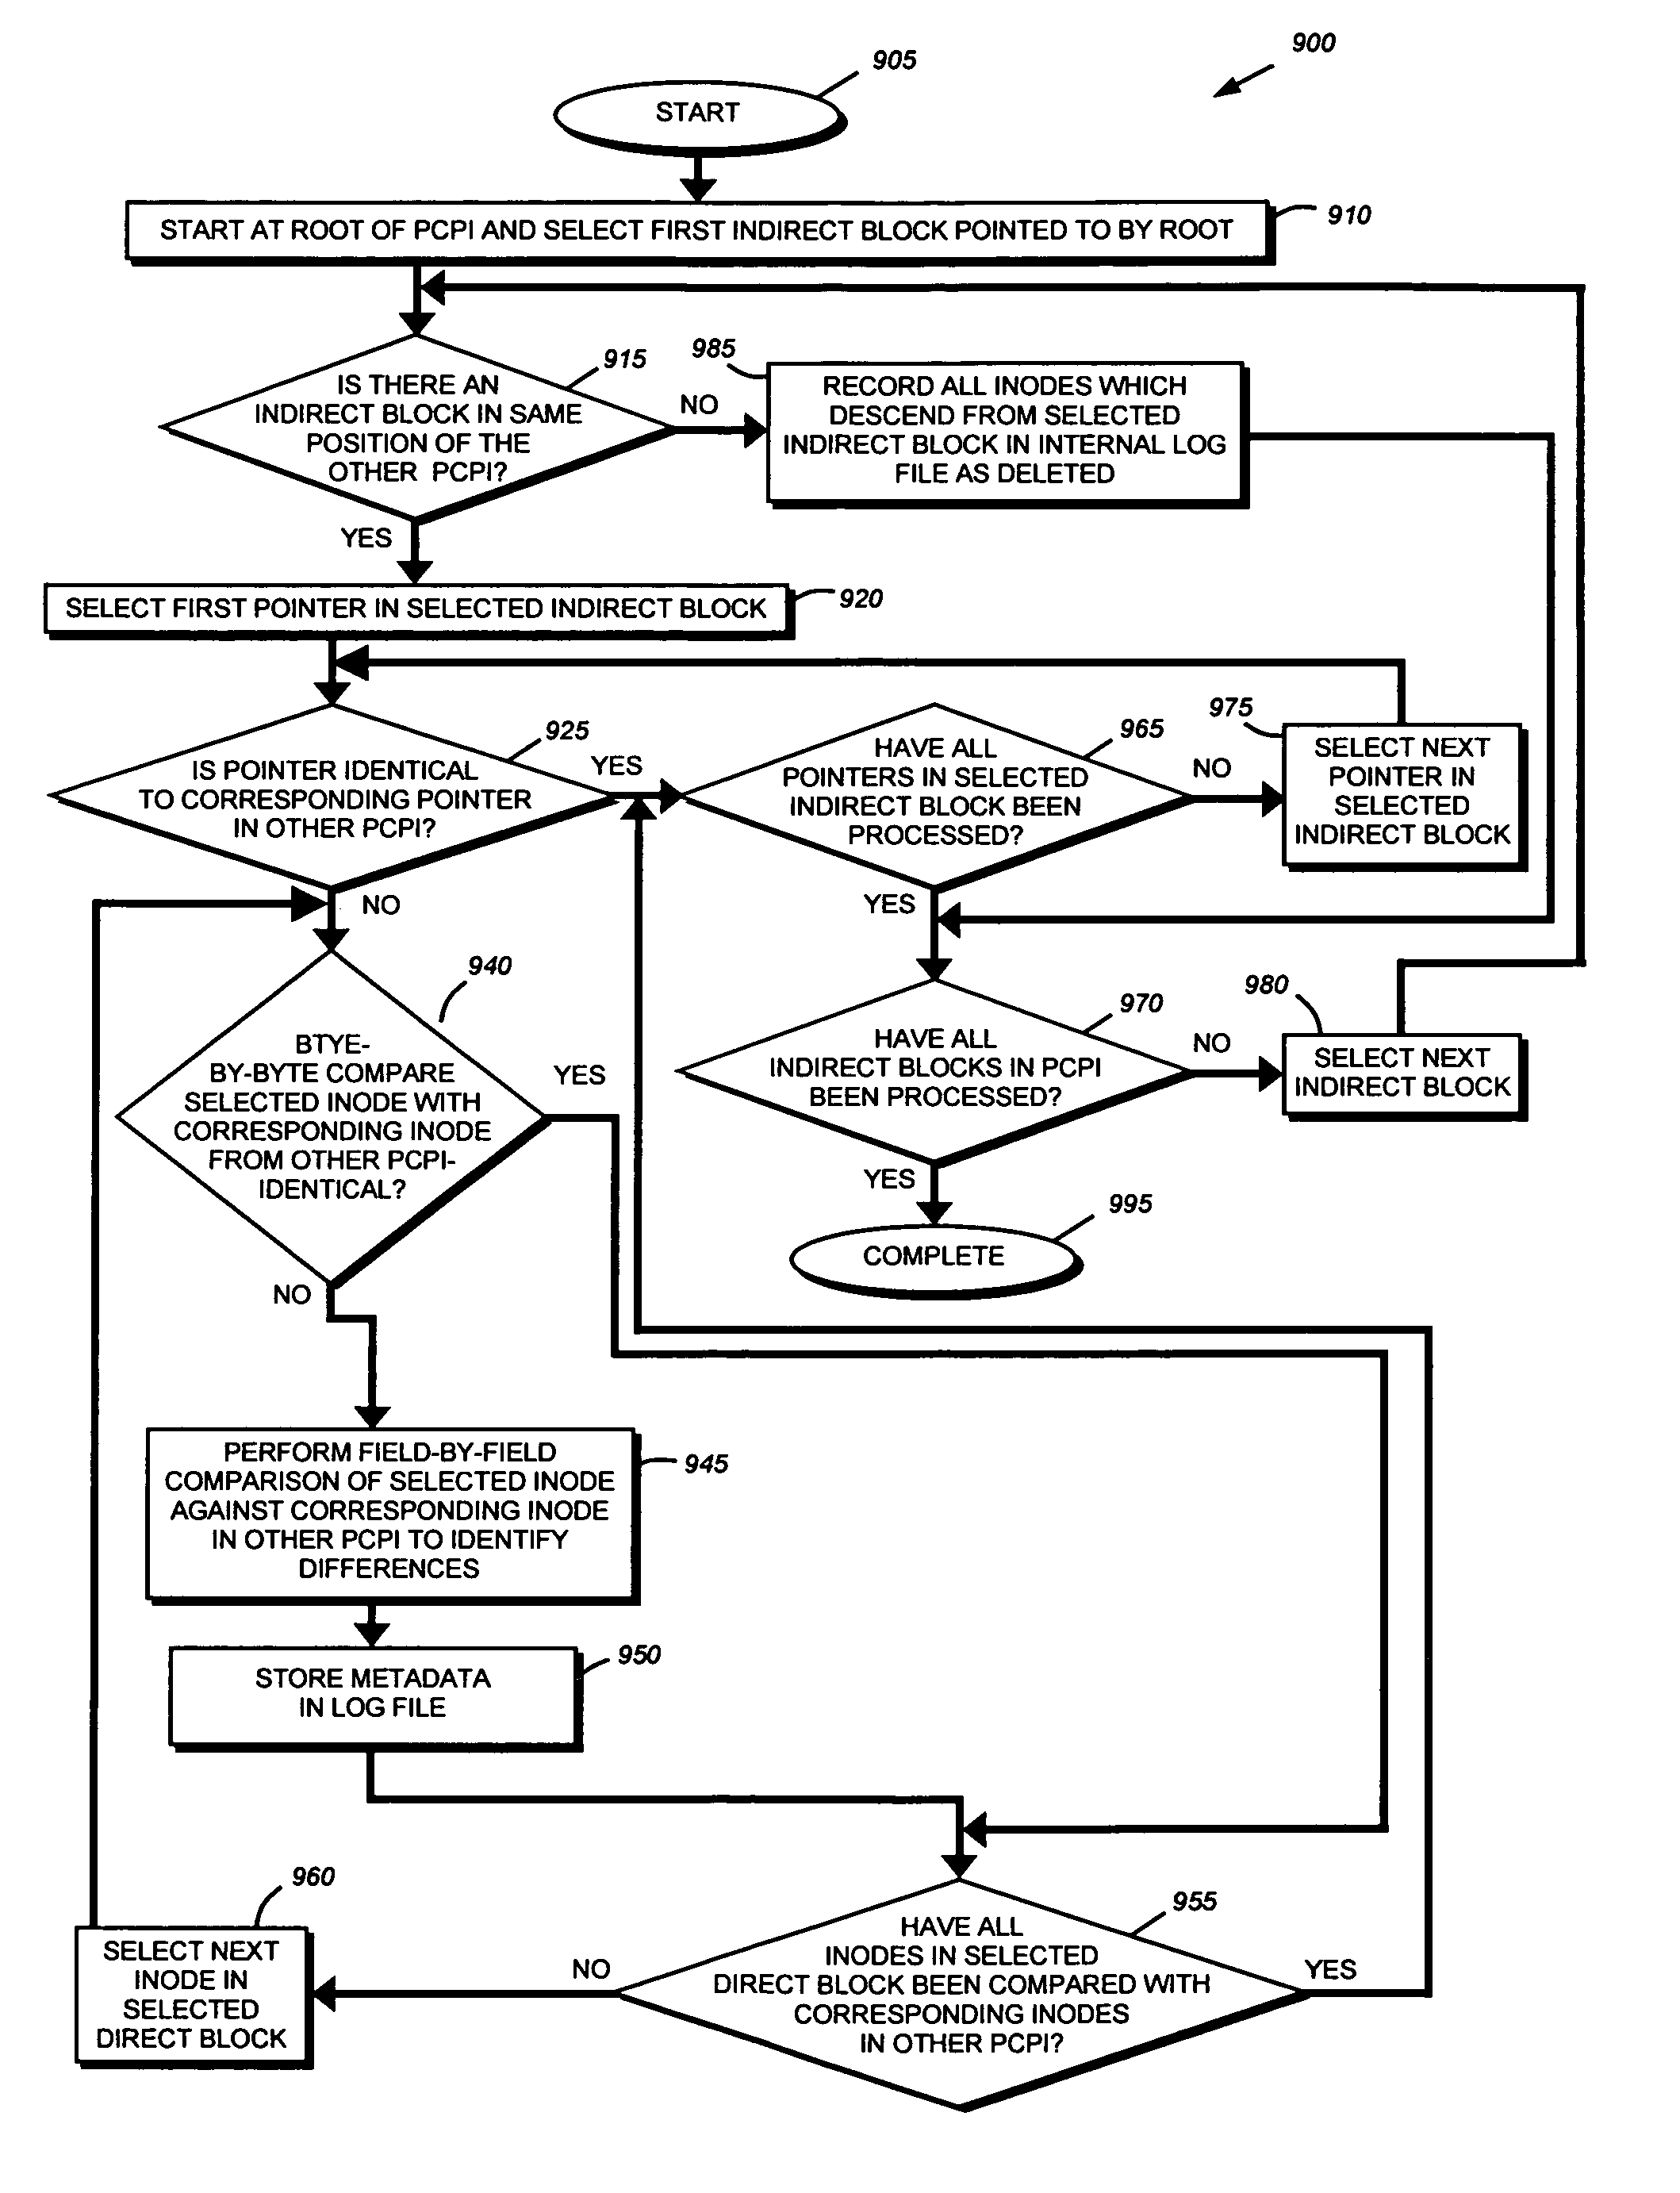 System and method for quickly determining changed metadata using persistent consistency point image differencing